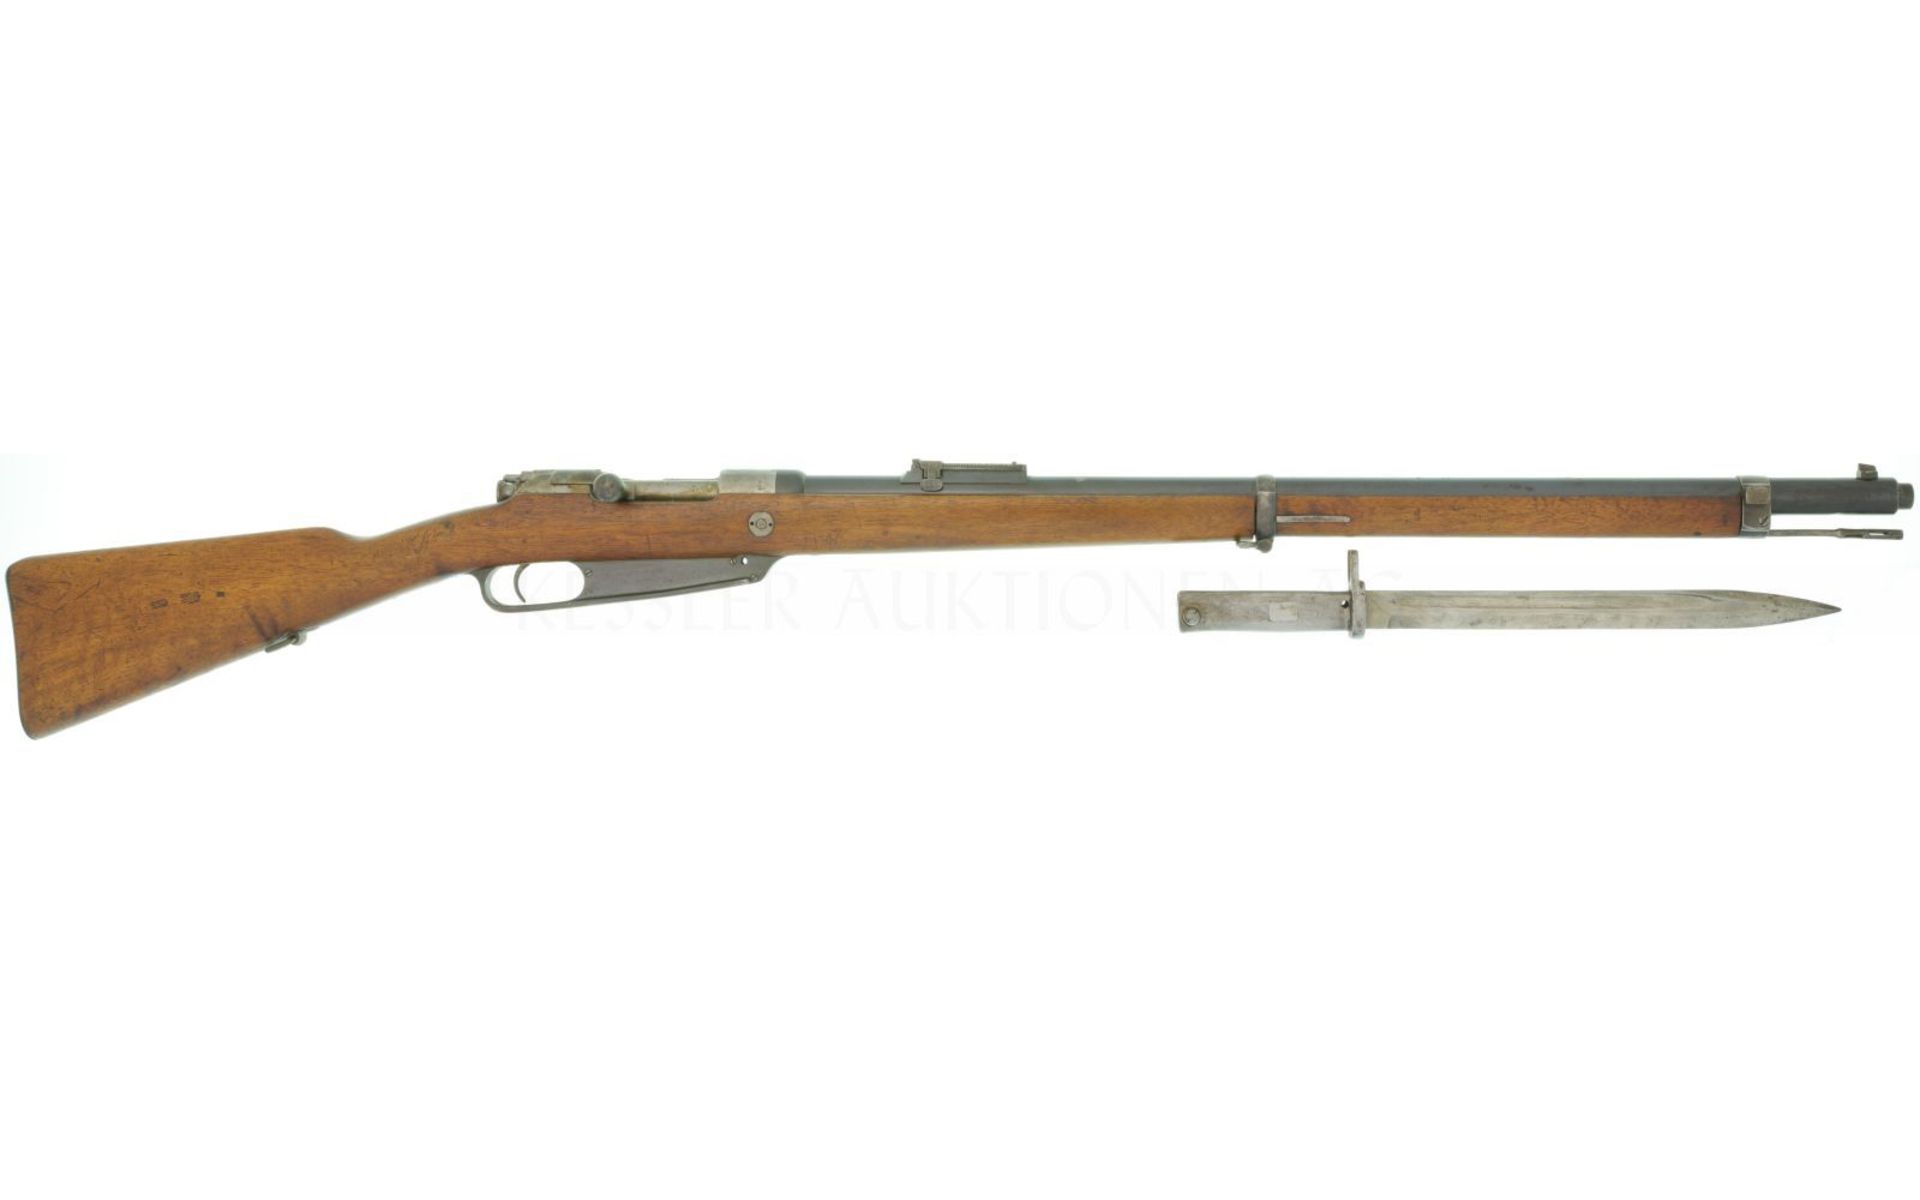 Repetierbüchse, Mauser Modell 1888, OEWG Steyr 1890, Kal. 8x57IS